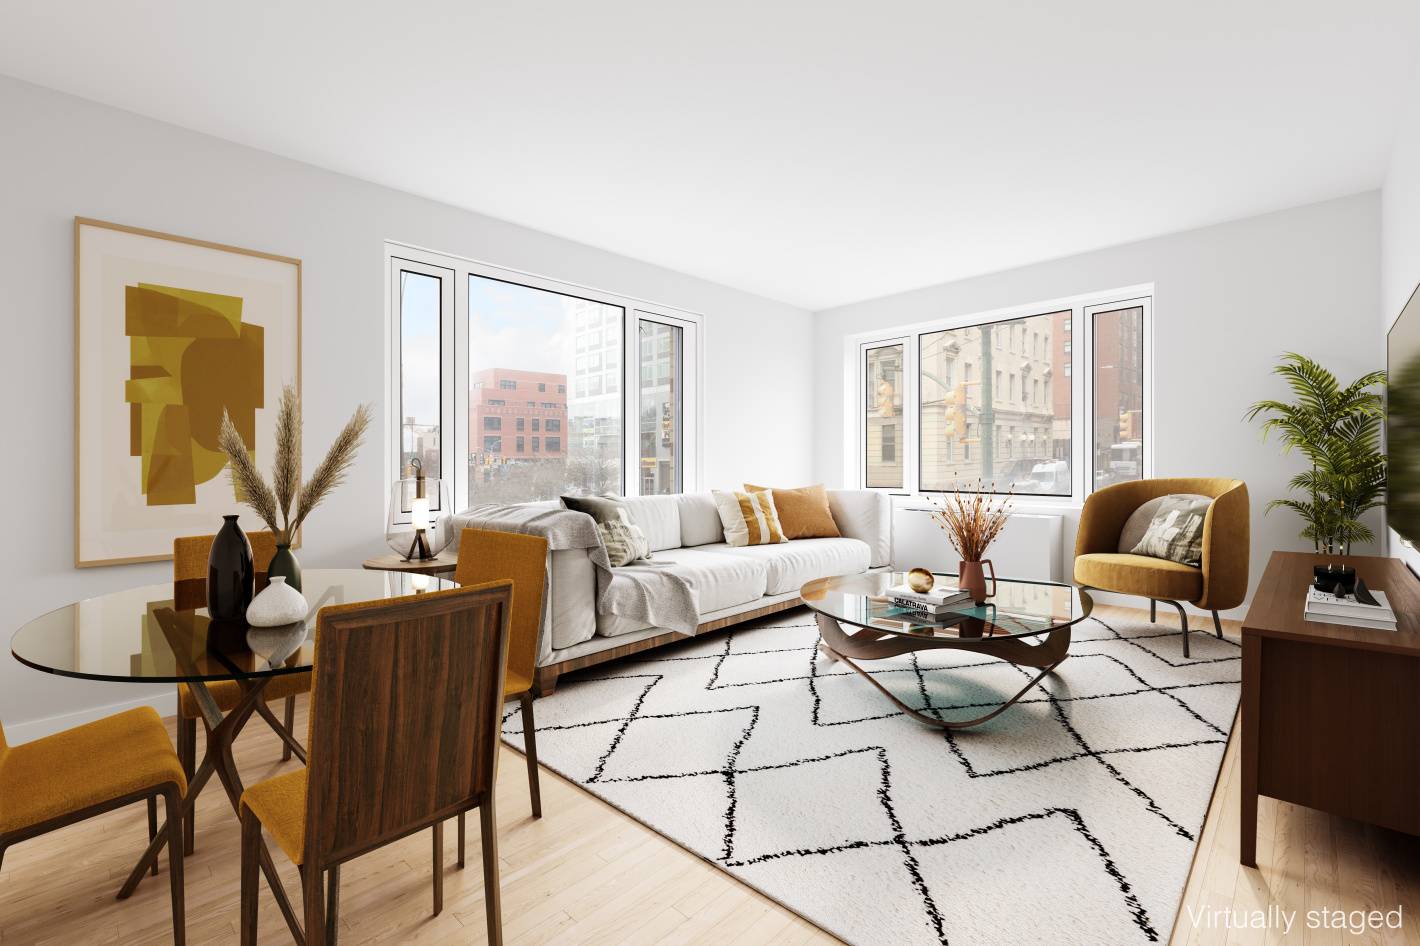 Apt 2F at 53 Boerum Place, is a corner unit offering the largest two bedroom, two bath configuration at The Boulevard East, one of the most sought after condominiums in ...